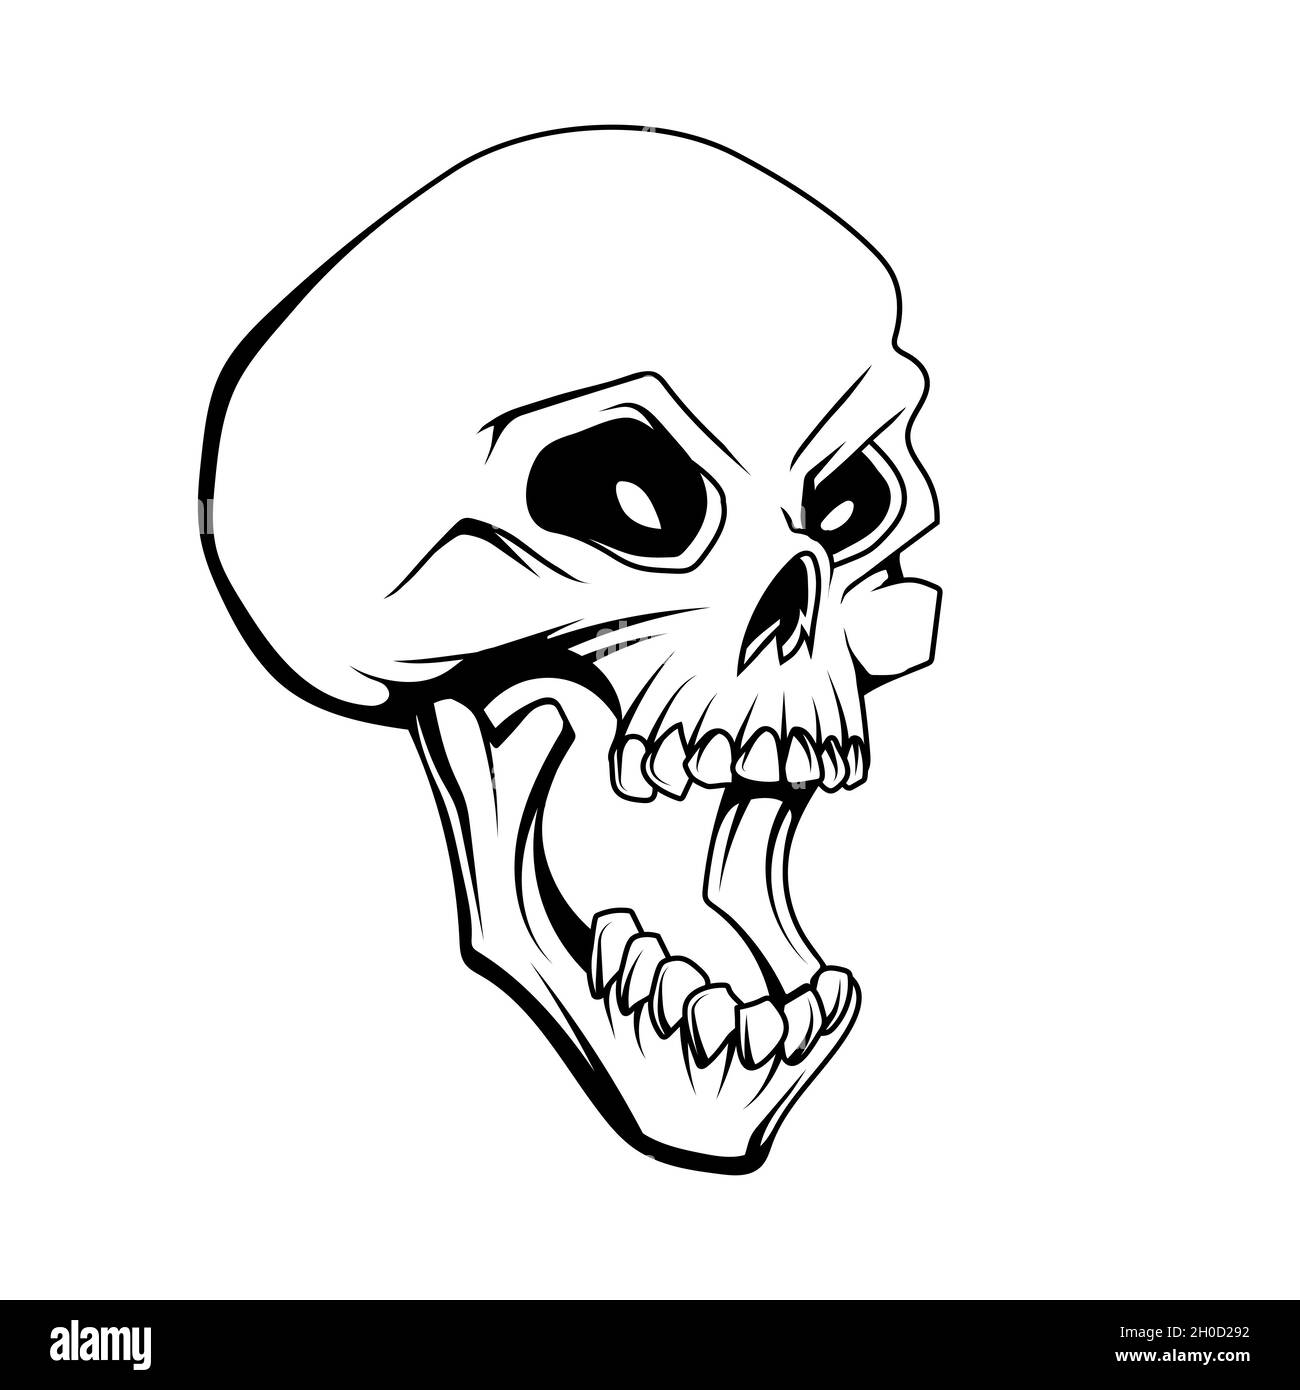 16+ Open Mouth Skull Drawing